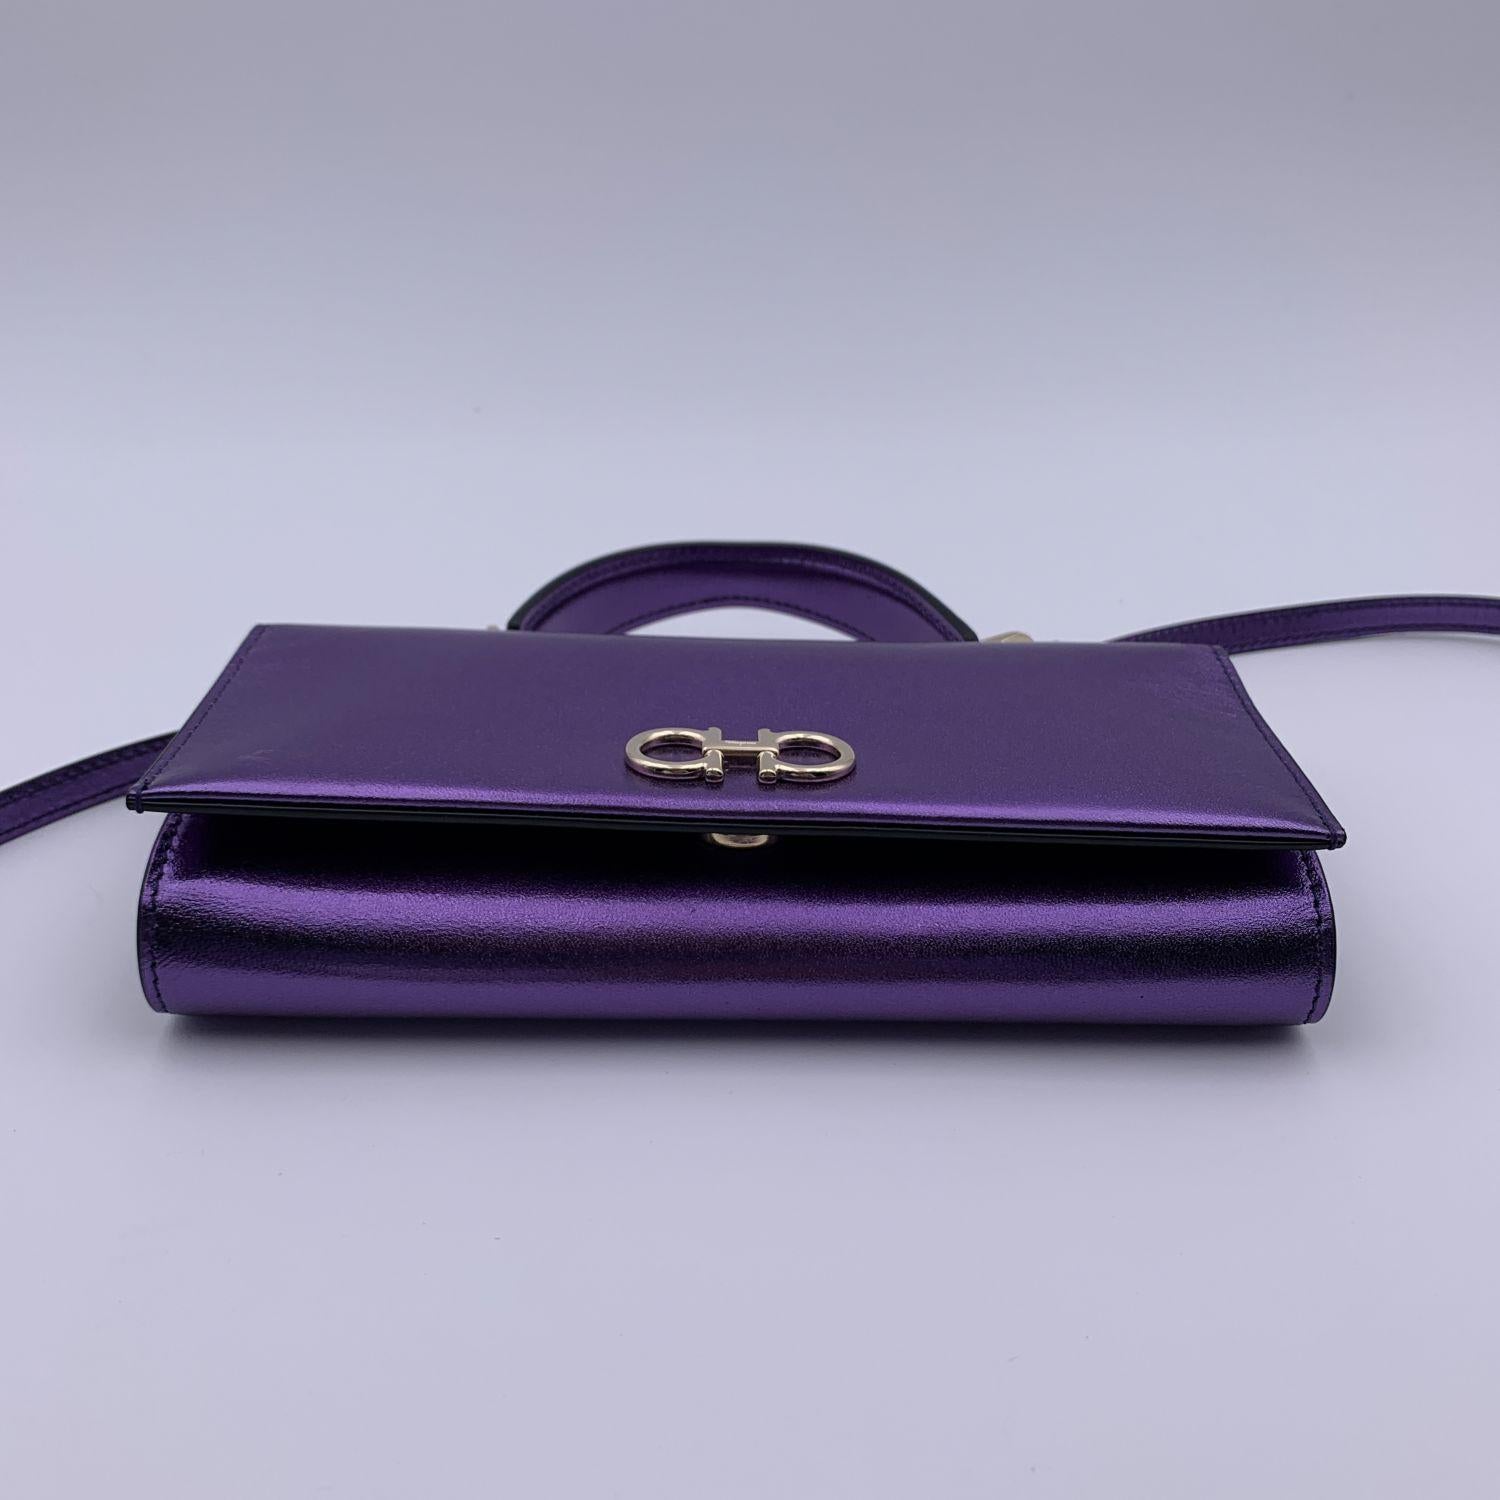 Salvatore Ferragamo 'The Gancini' Mini Bag in purple leather with metallic finish. Flap with magnetic button closure on the front. Silver metal signature Gancini logo on the front. Top handle and removable shoulder strap. Salvatore Ferragamo